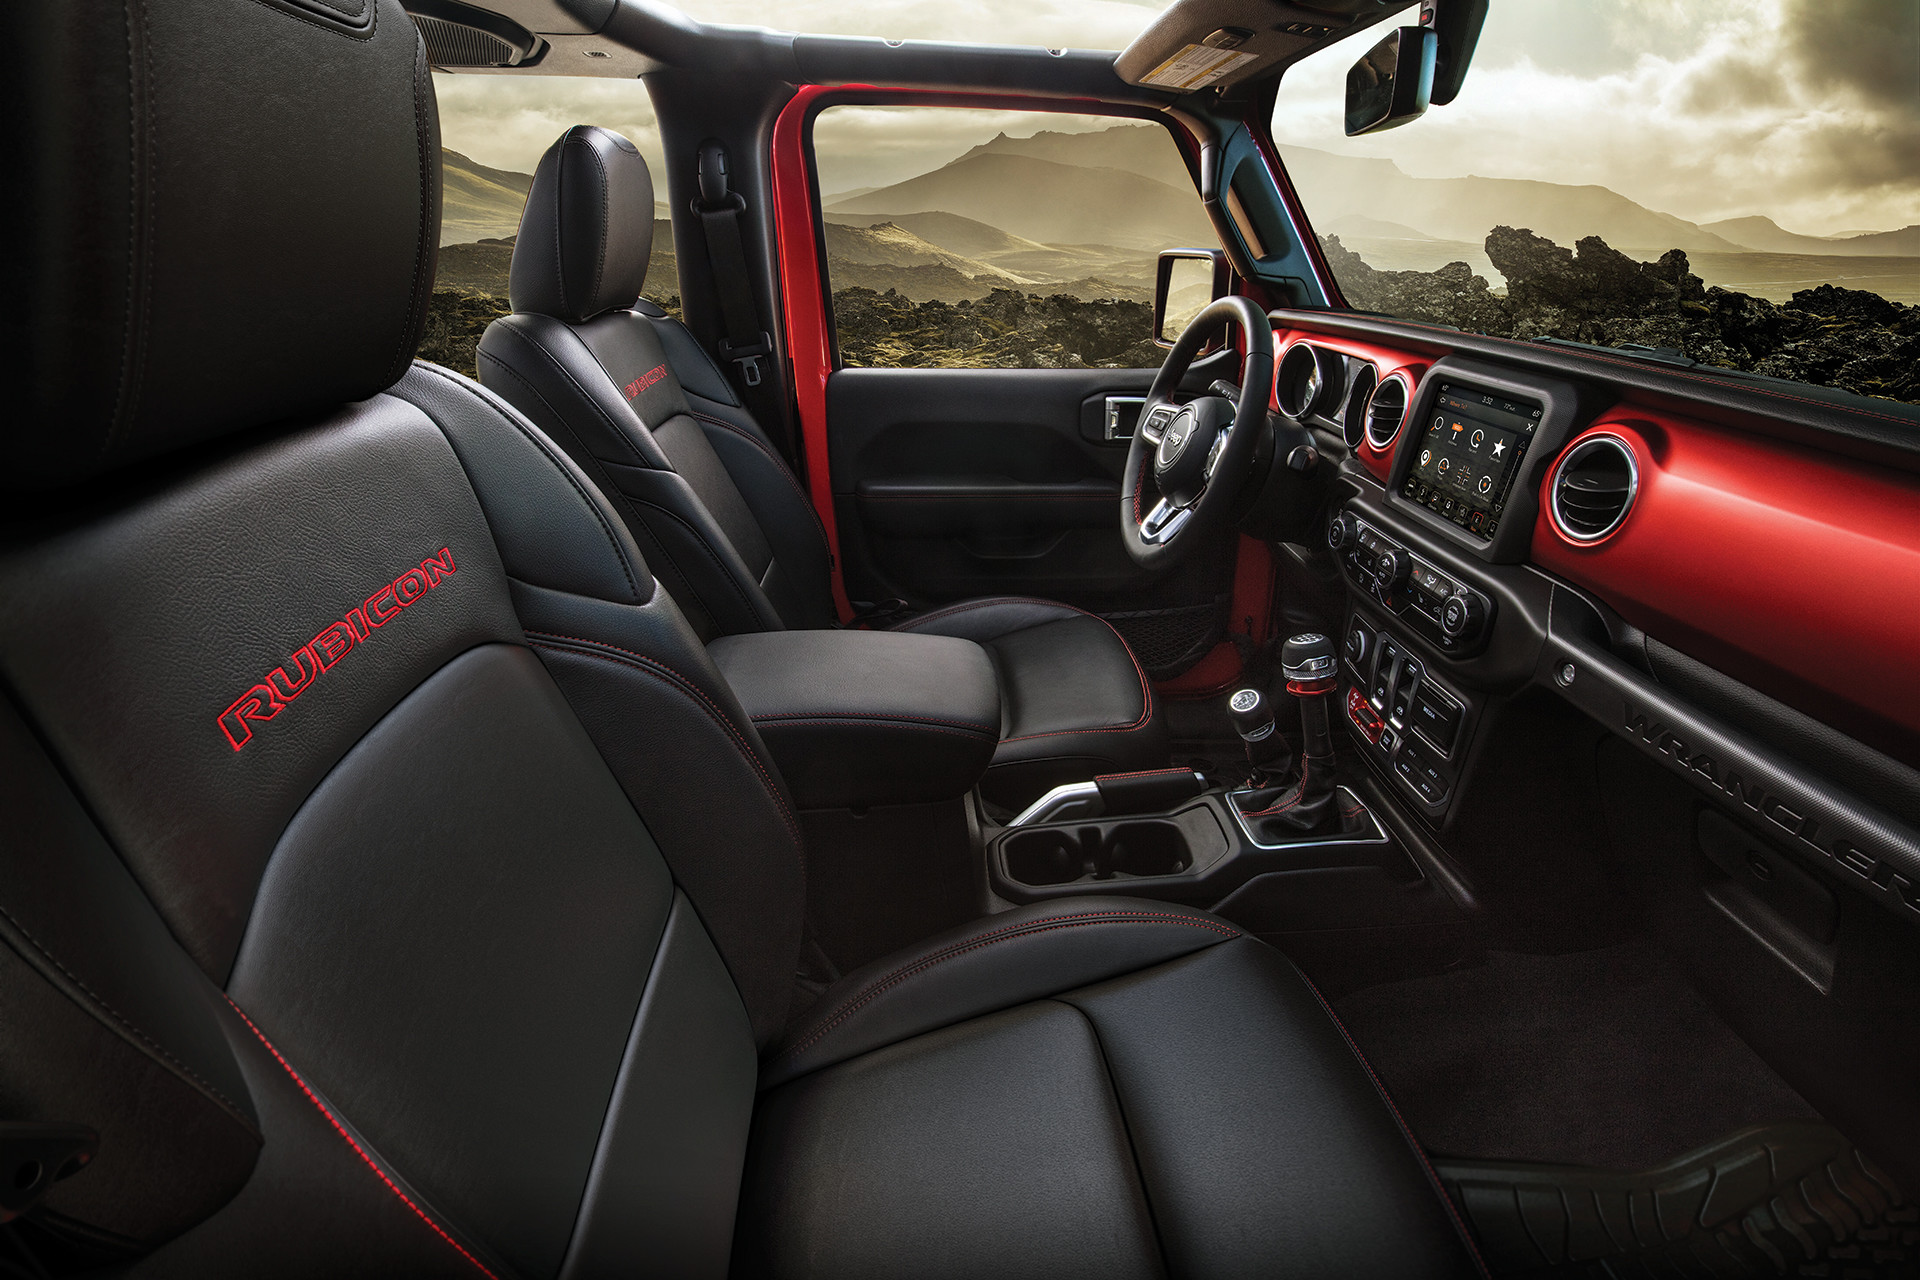 The front bucket seats of the 2022 Jeep Wrangler Rubicon